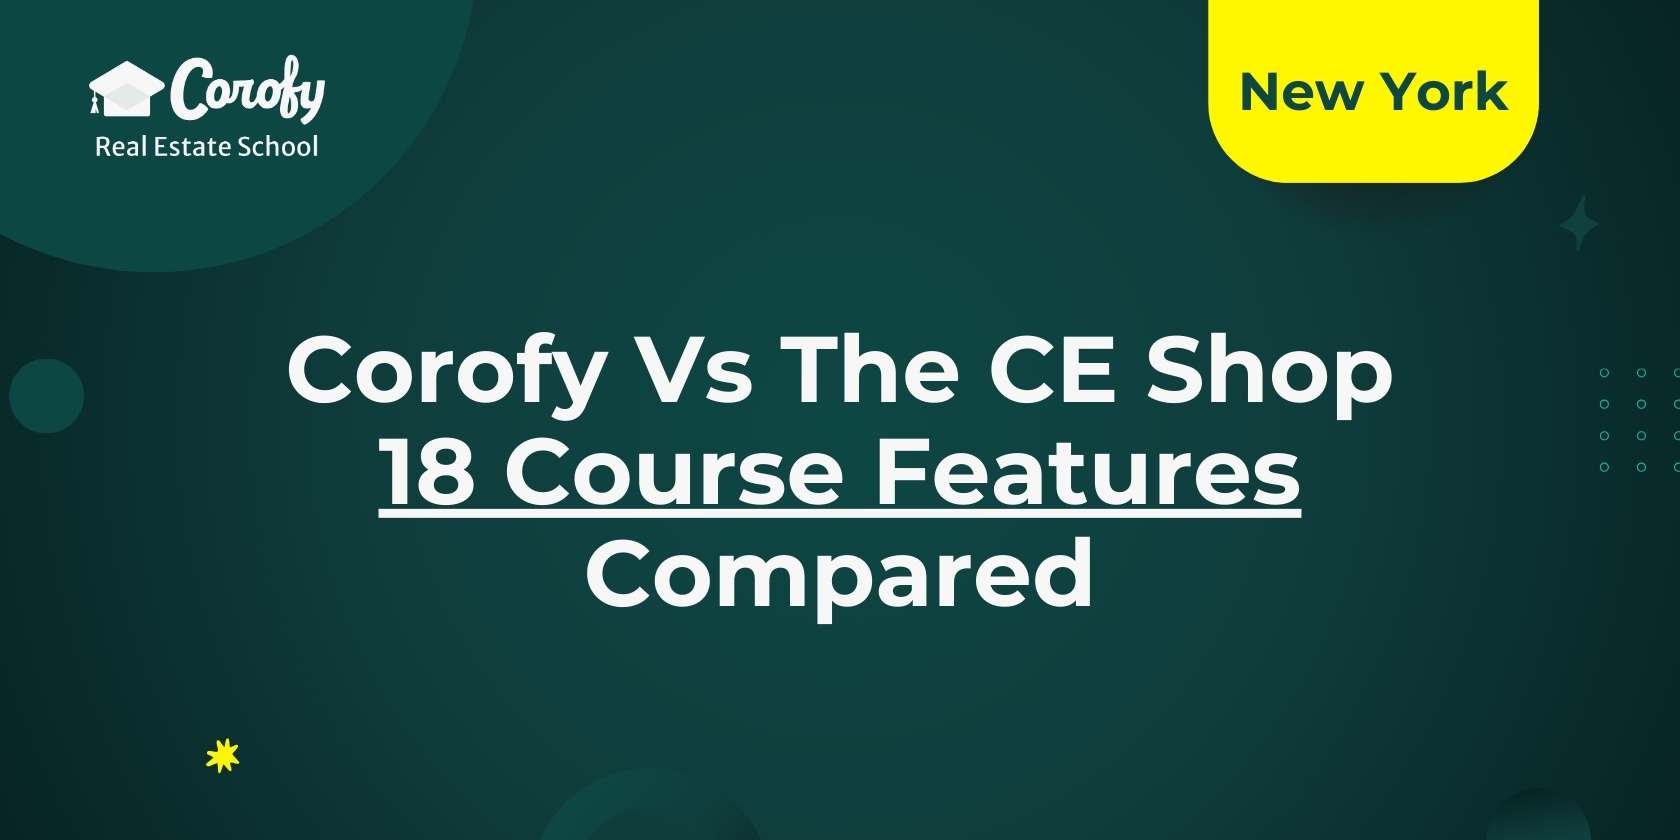 Corofy vs The CE Shop - 18 Course Features Compared